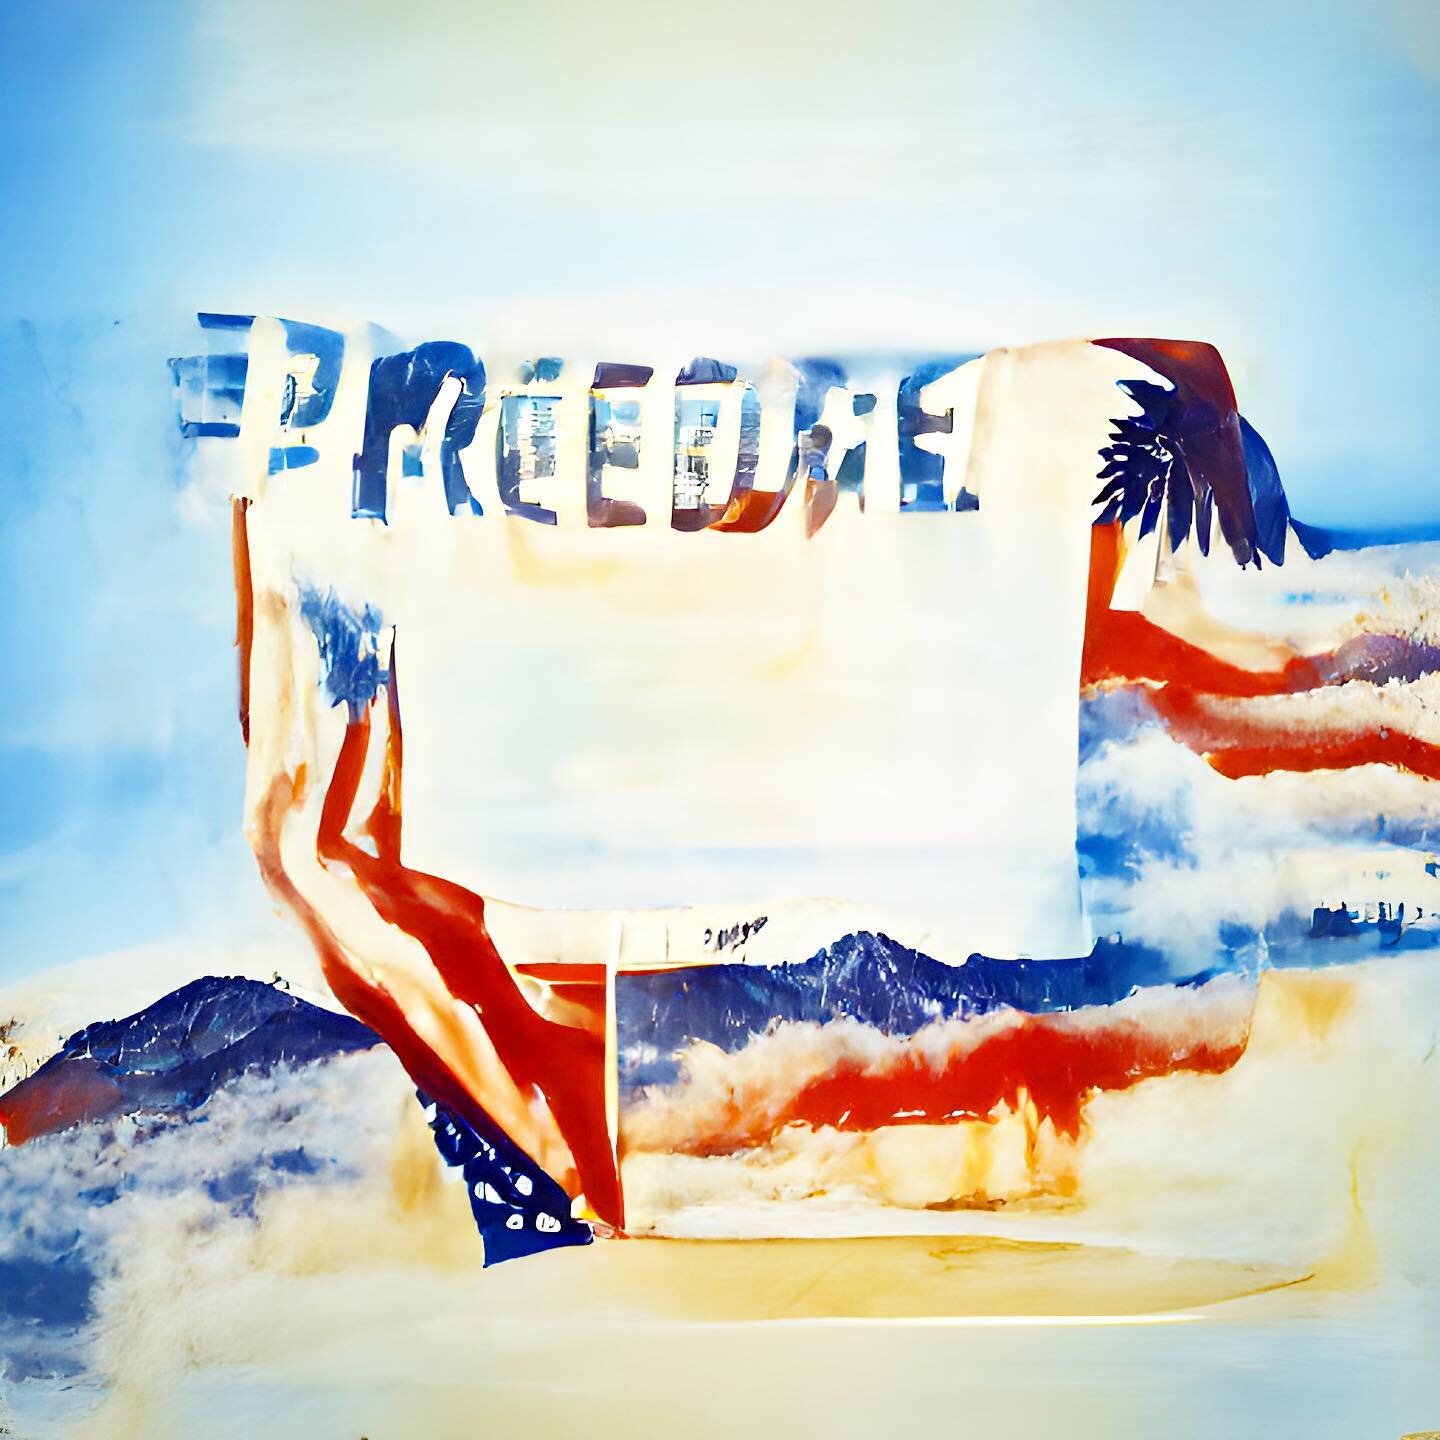 &lsquo;cause freedom is a privilege

(05/92) #albumart from #lyrics of the song #artblessamerica generated using #ganart #machinelearning for new #nftcollection #nft #nftmusic on @opensea w/ @sweet_chuck @ravin_dave @dj_journey

#nftcommunity #nftcol